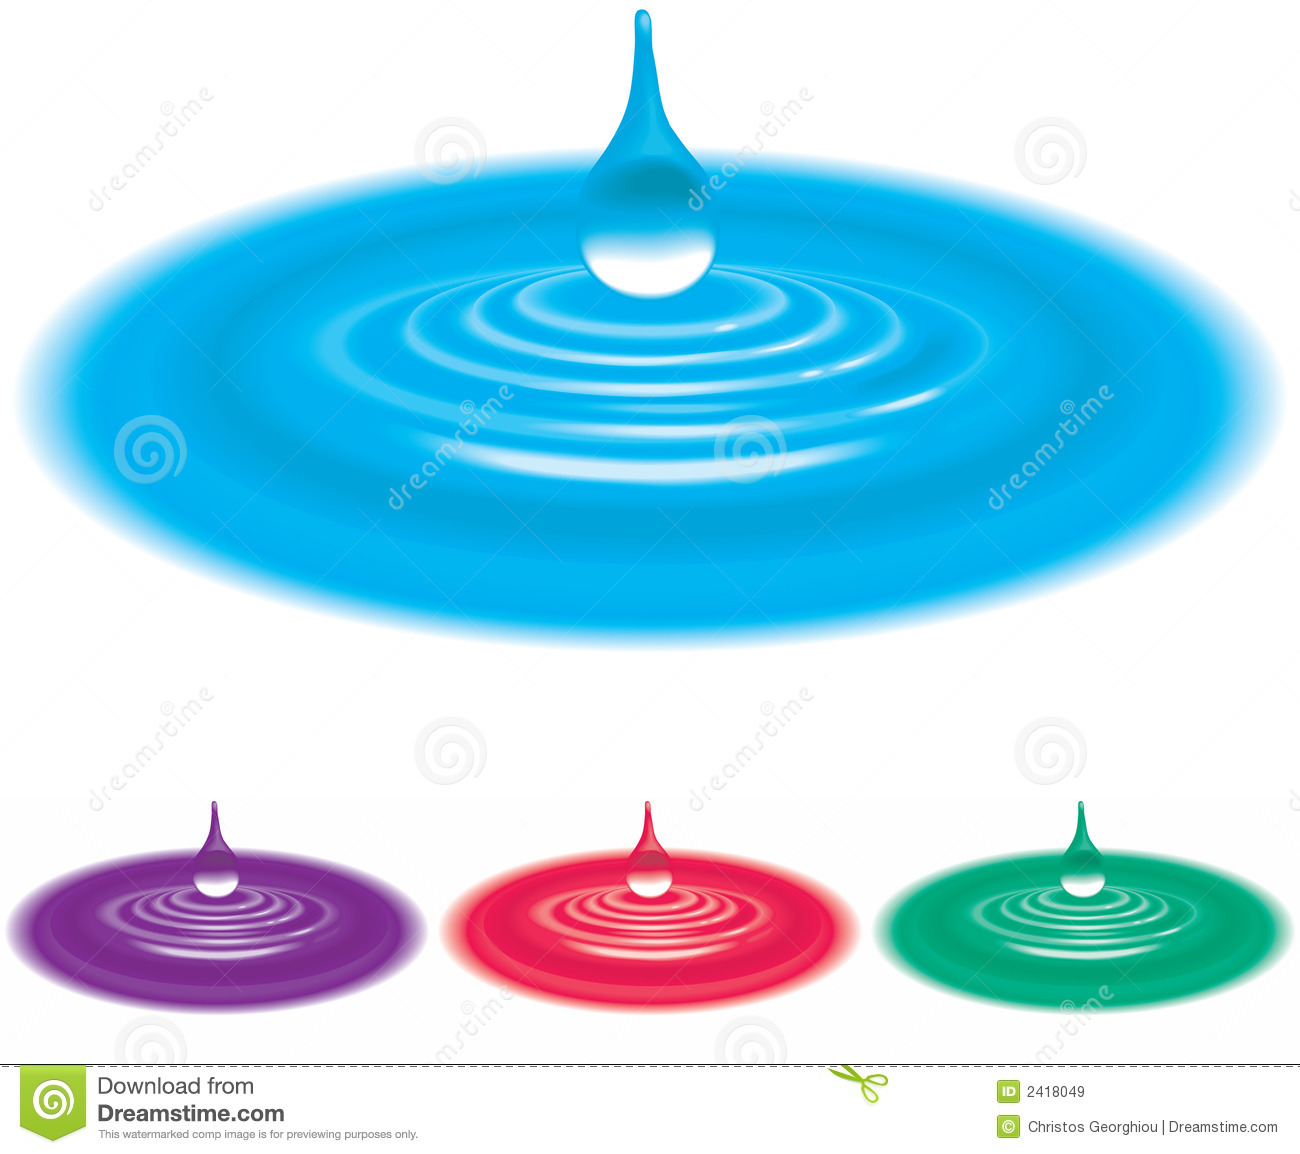 An Illustration Of A Drop Of Water Hitting The Surface Of A Pool  No